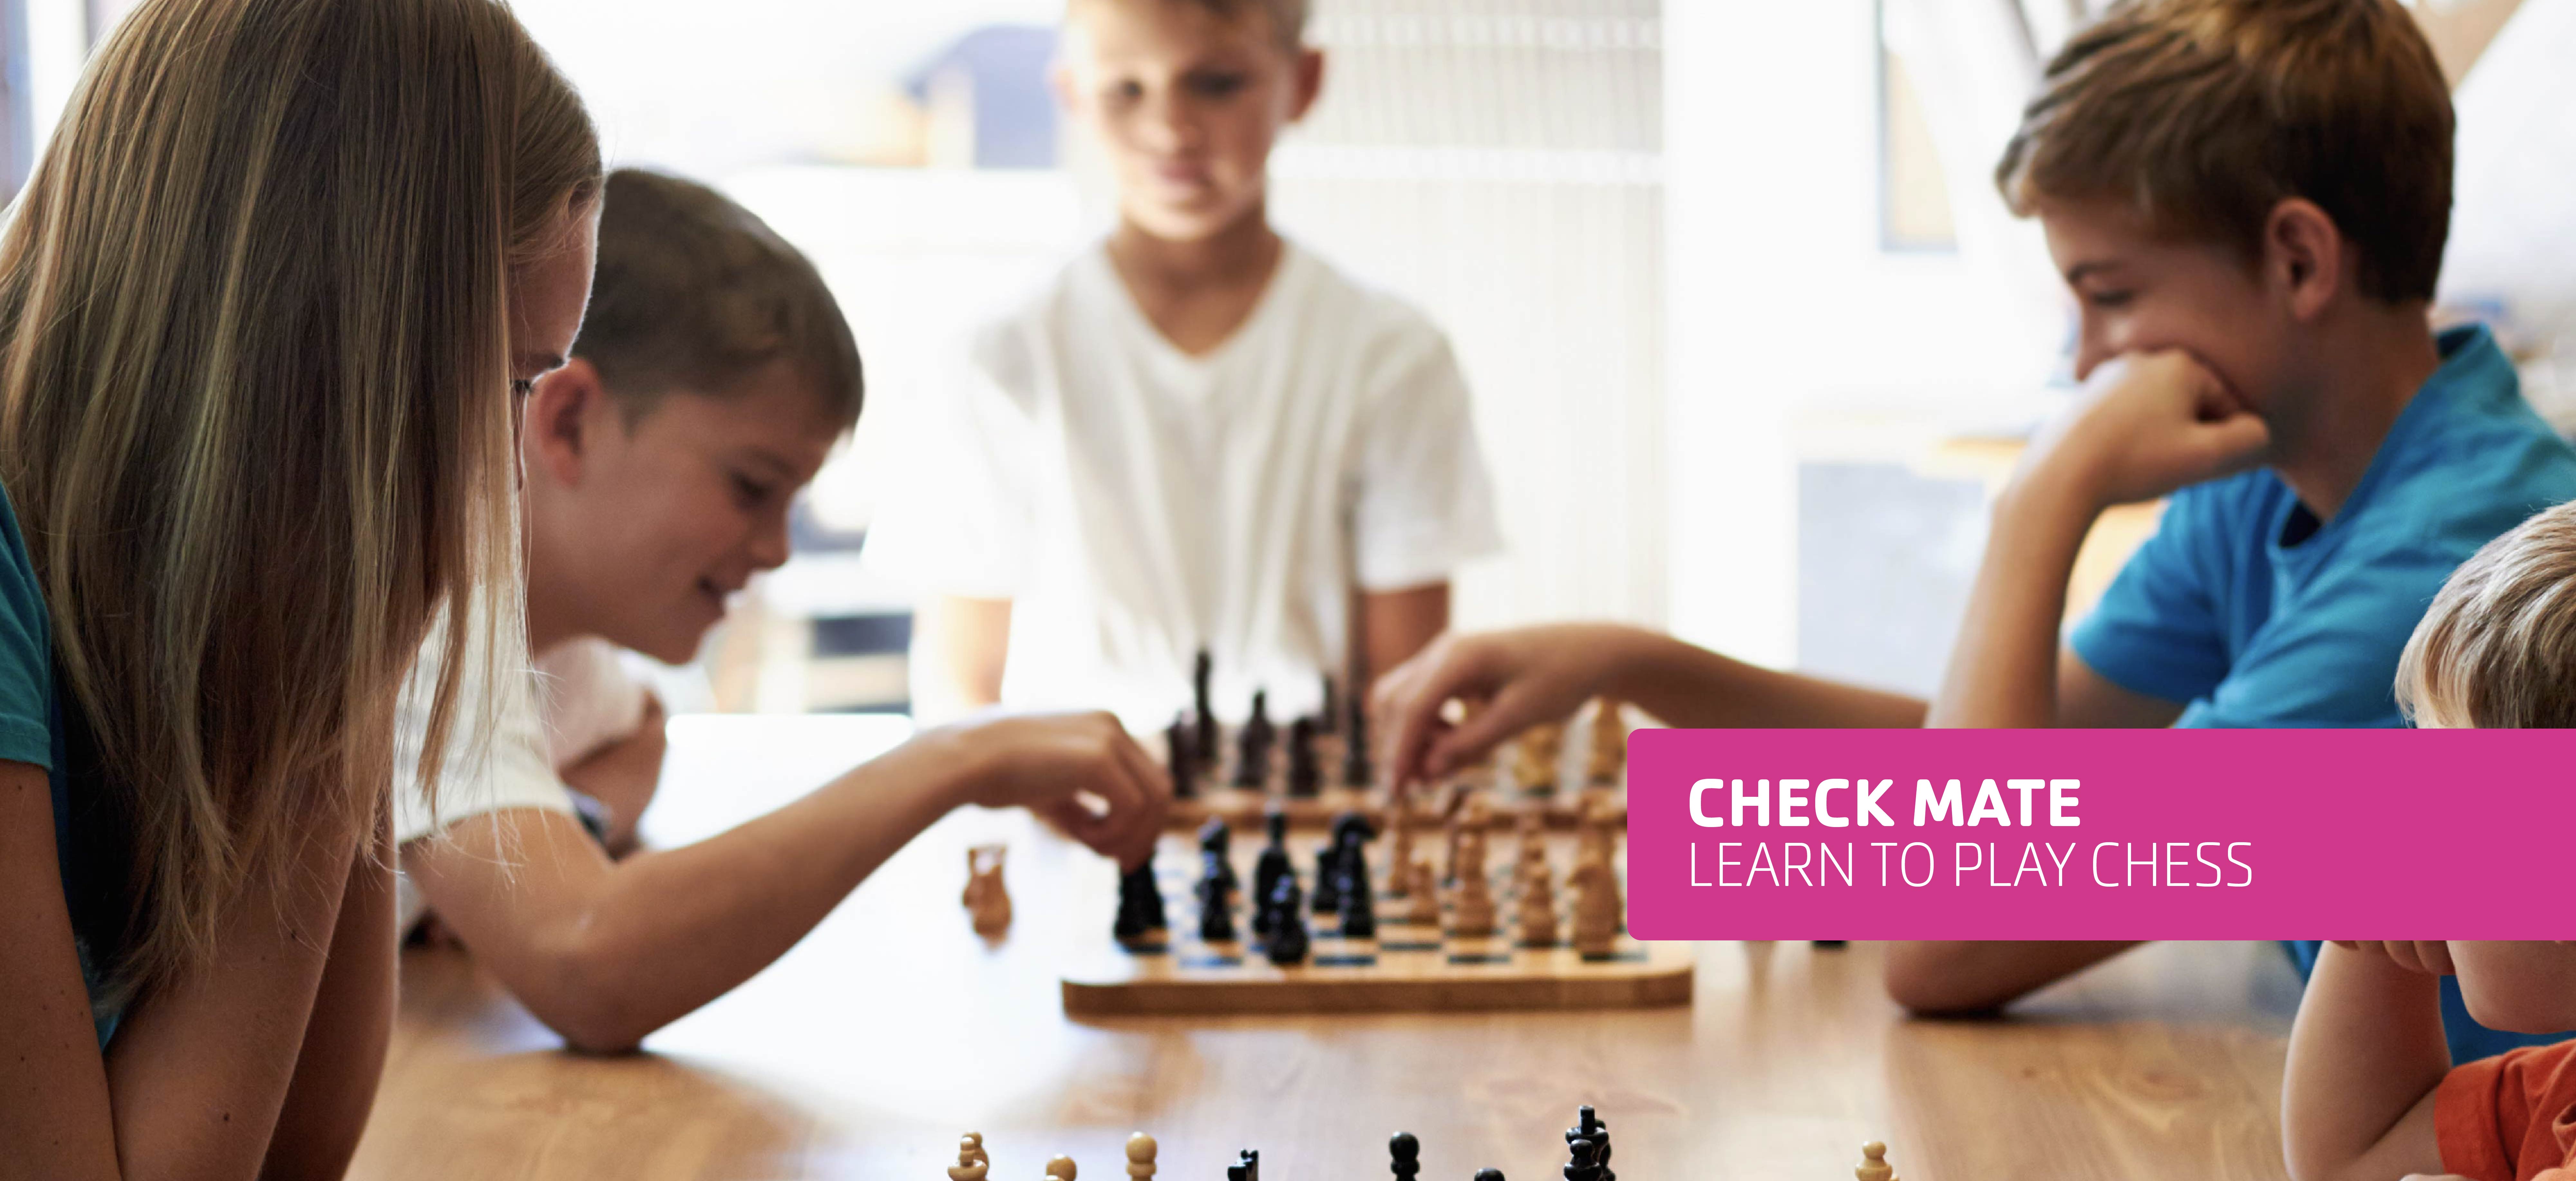 Chess at the Westport Weston Family YMCA